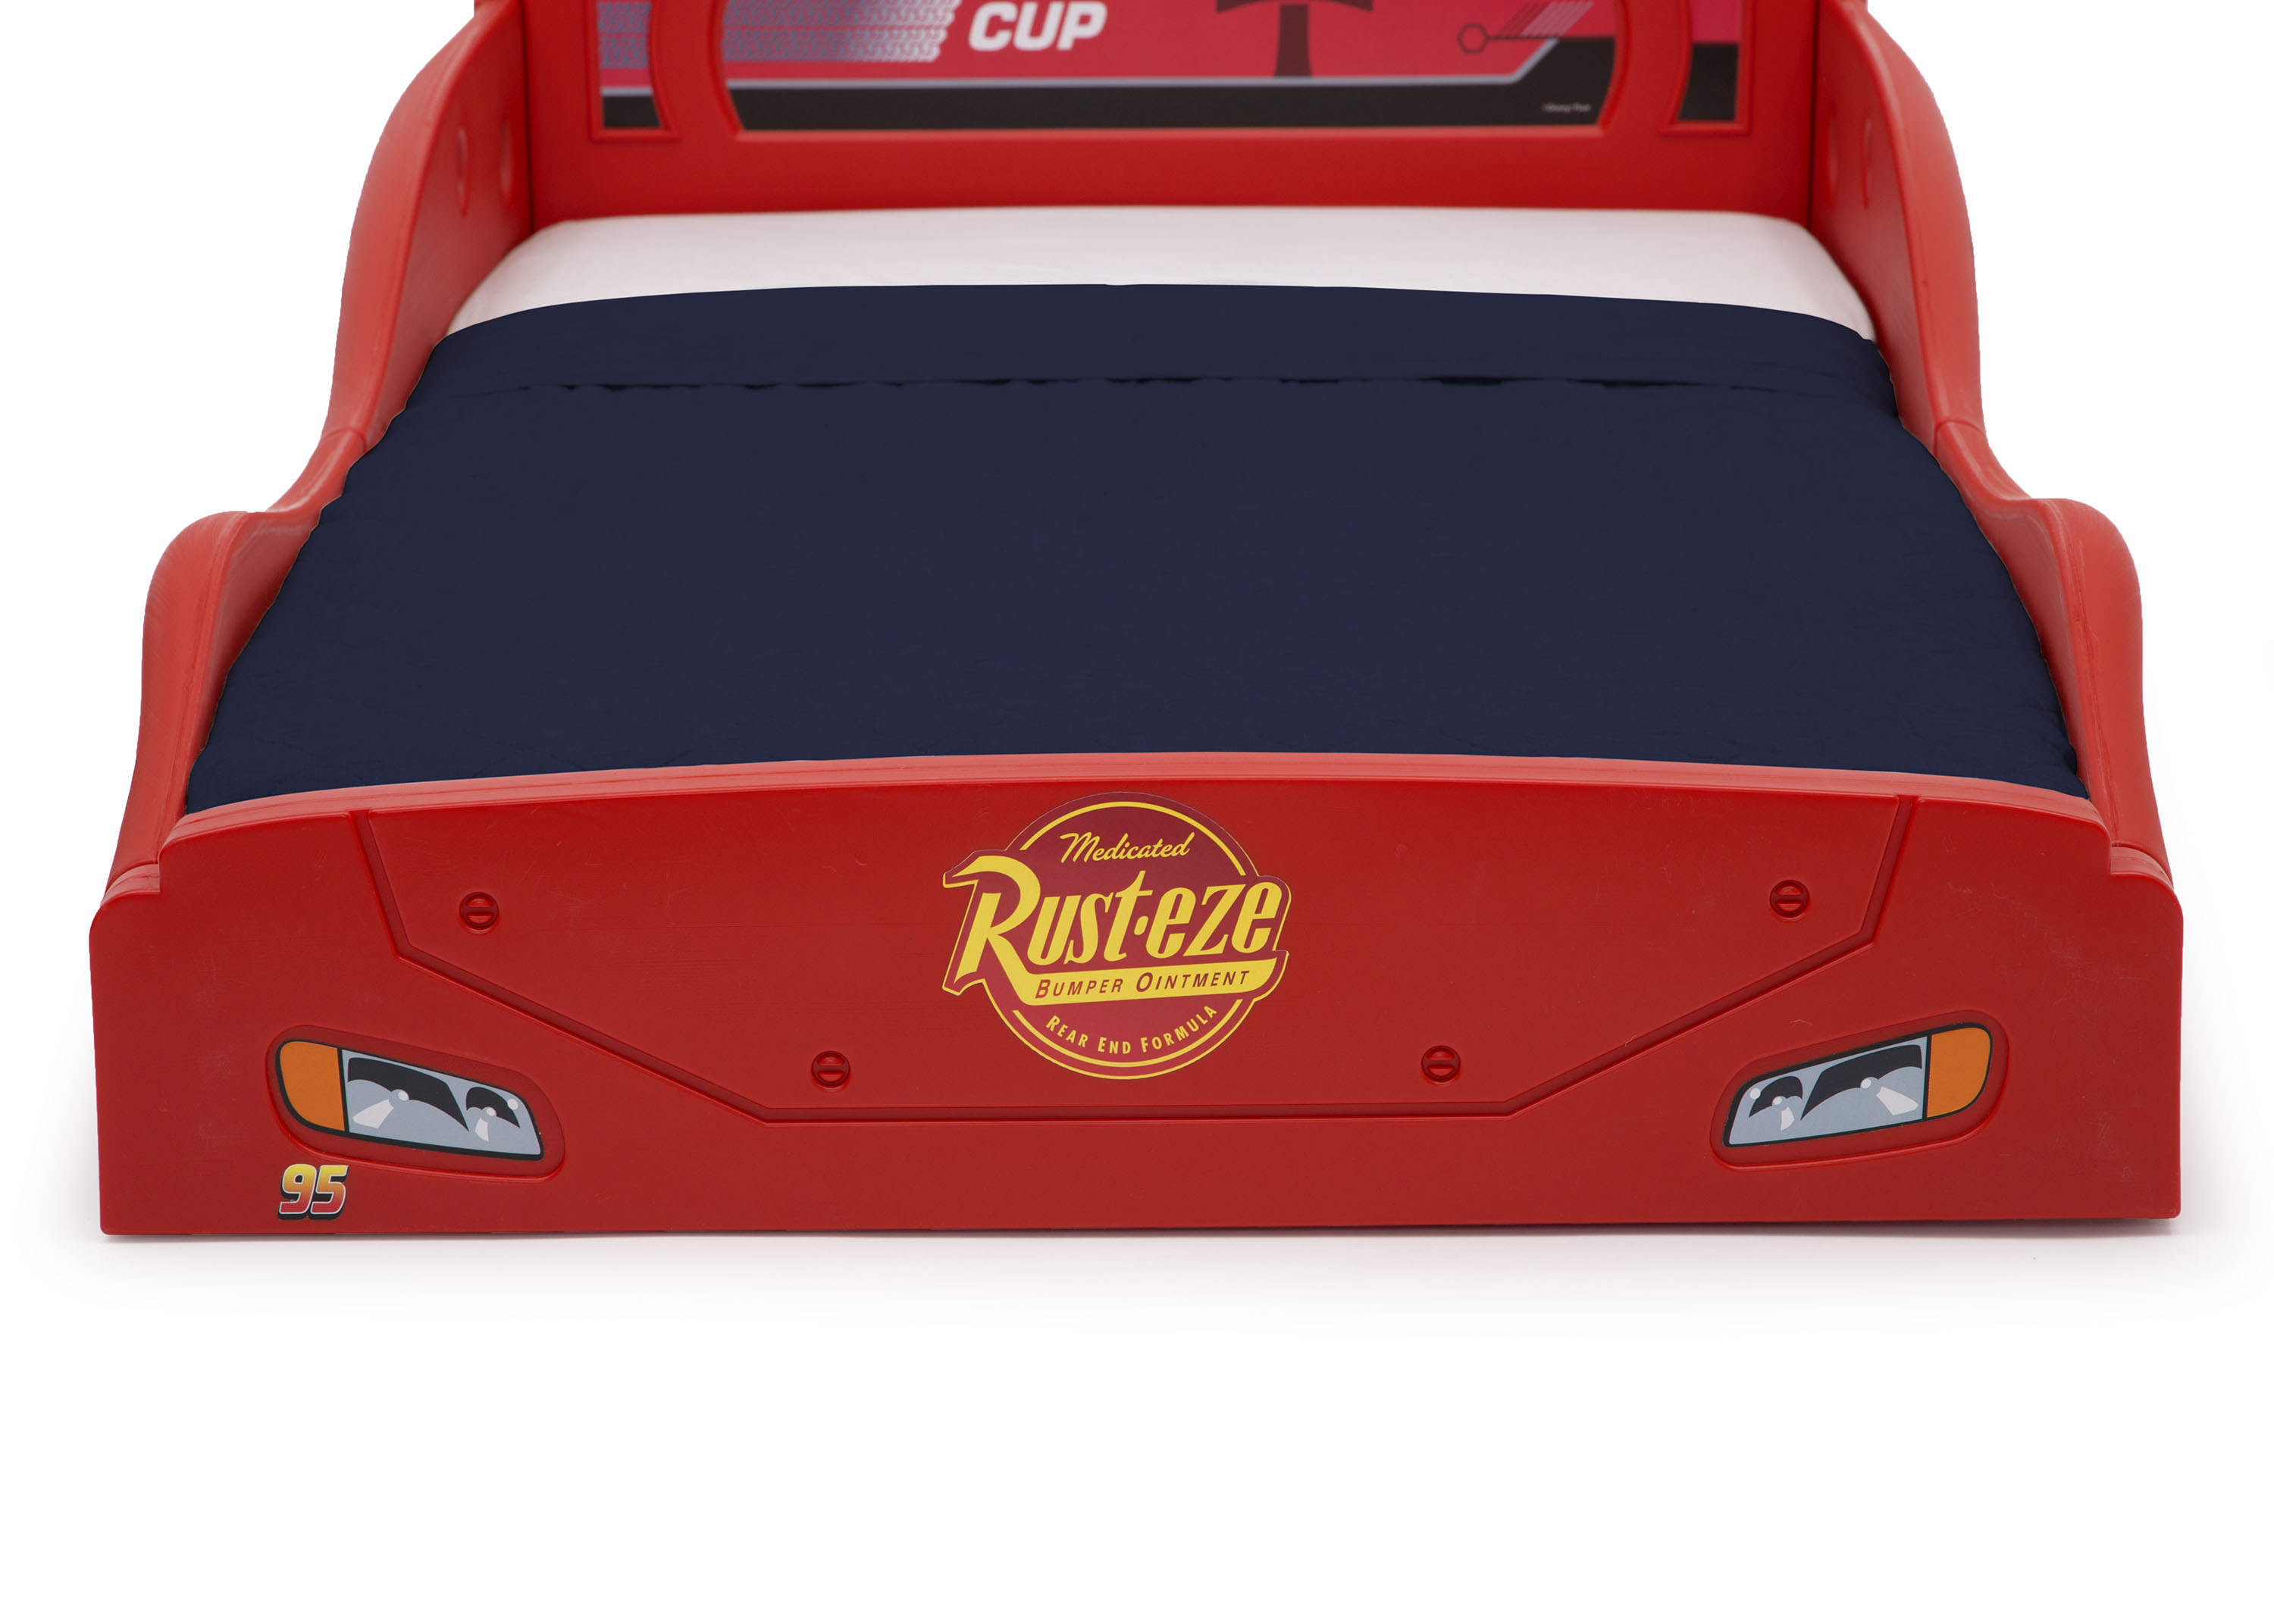 Disney Pixar Cars Lightning McQueen Plastic Sleep and Play Toddler Bed by Delta Children - image 3 of 6